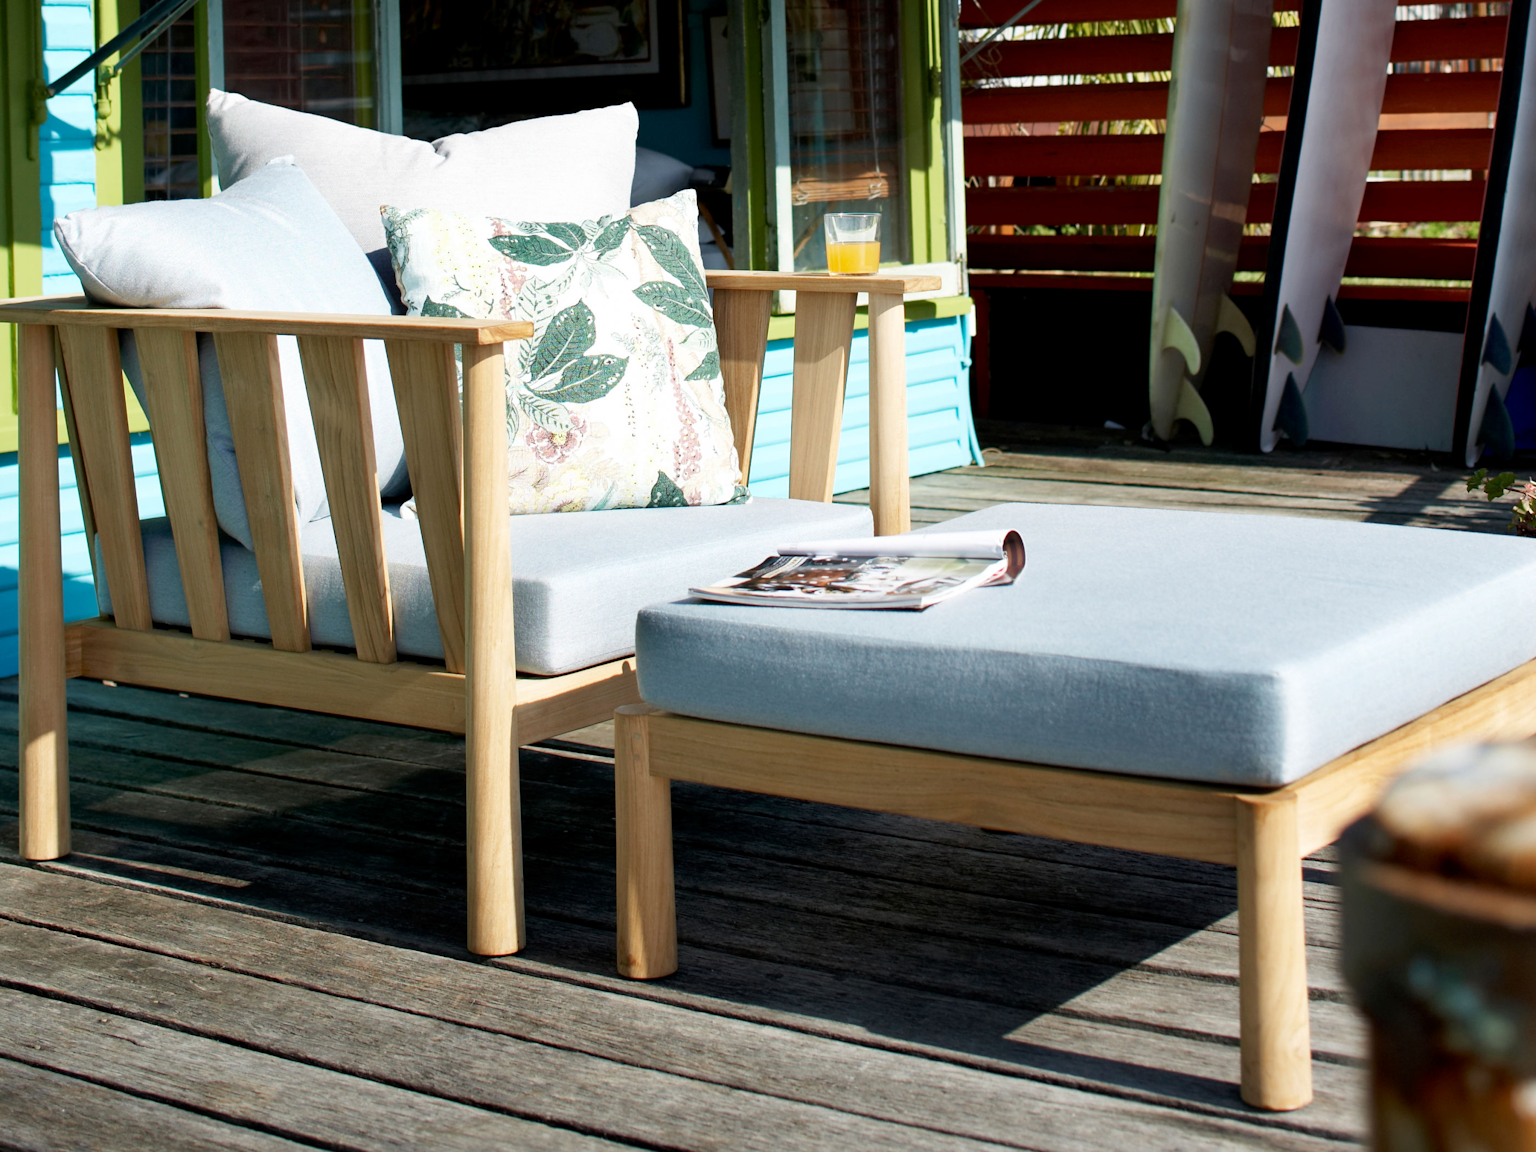 Malua lounge chair and ottoman on wooden deck